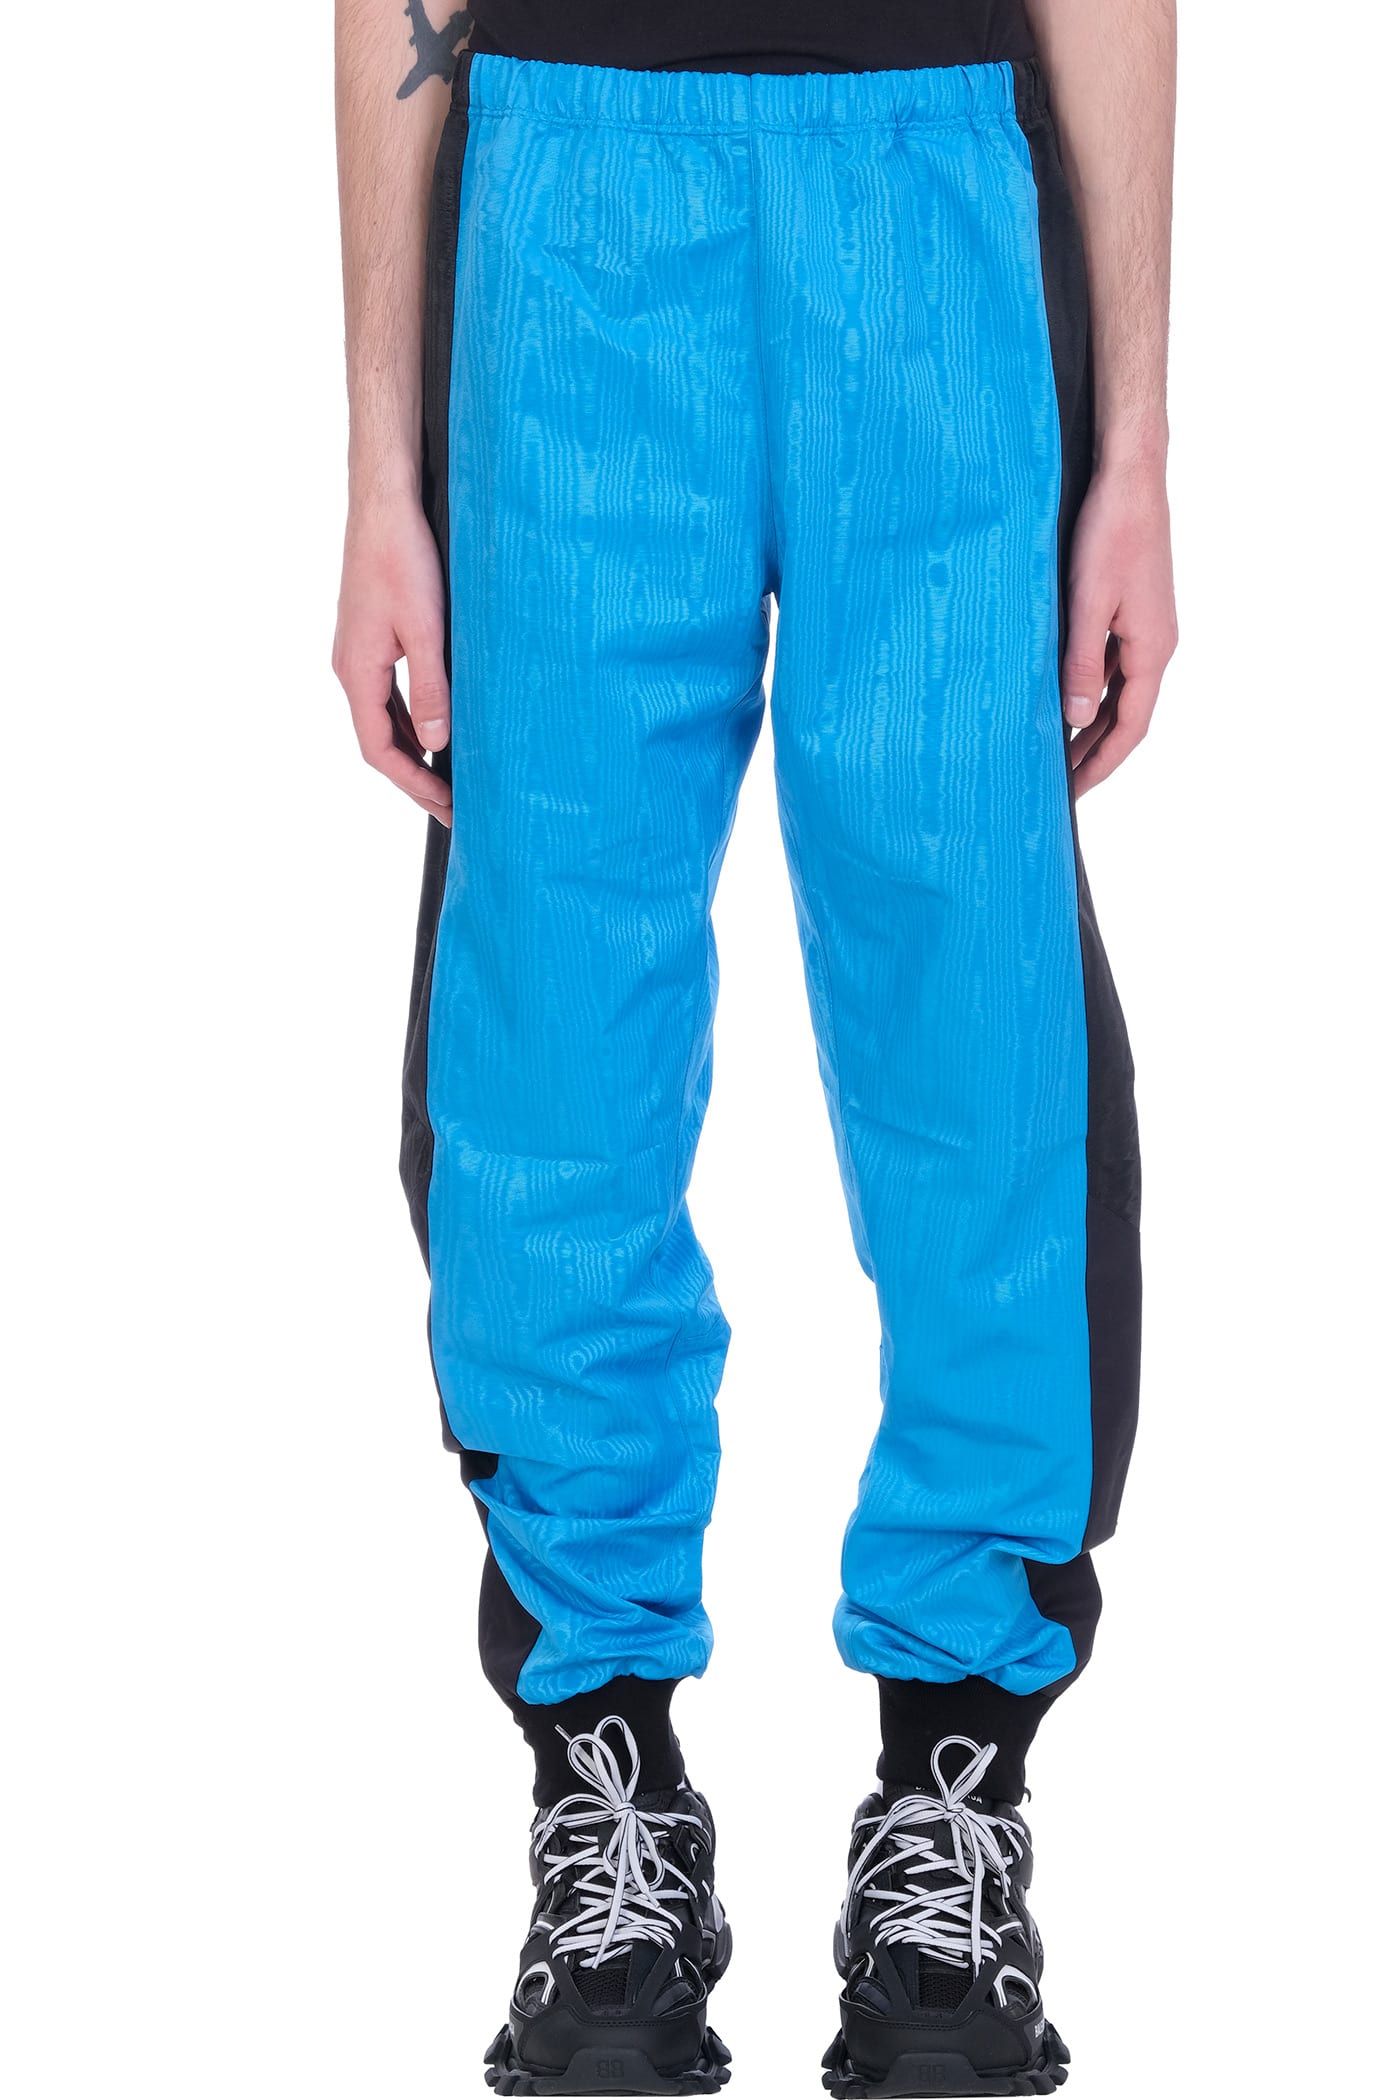 MARINE SERRE PANTS IN BLUE POLYESTER,P011SS21X06